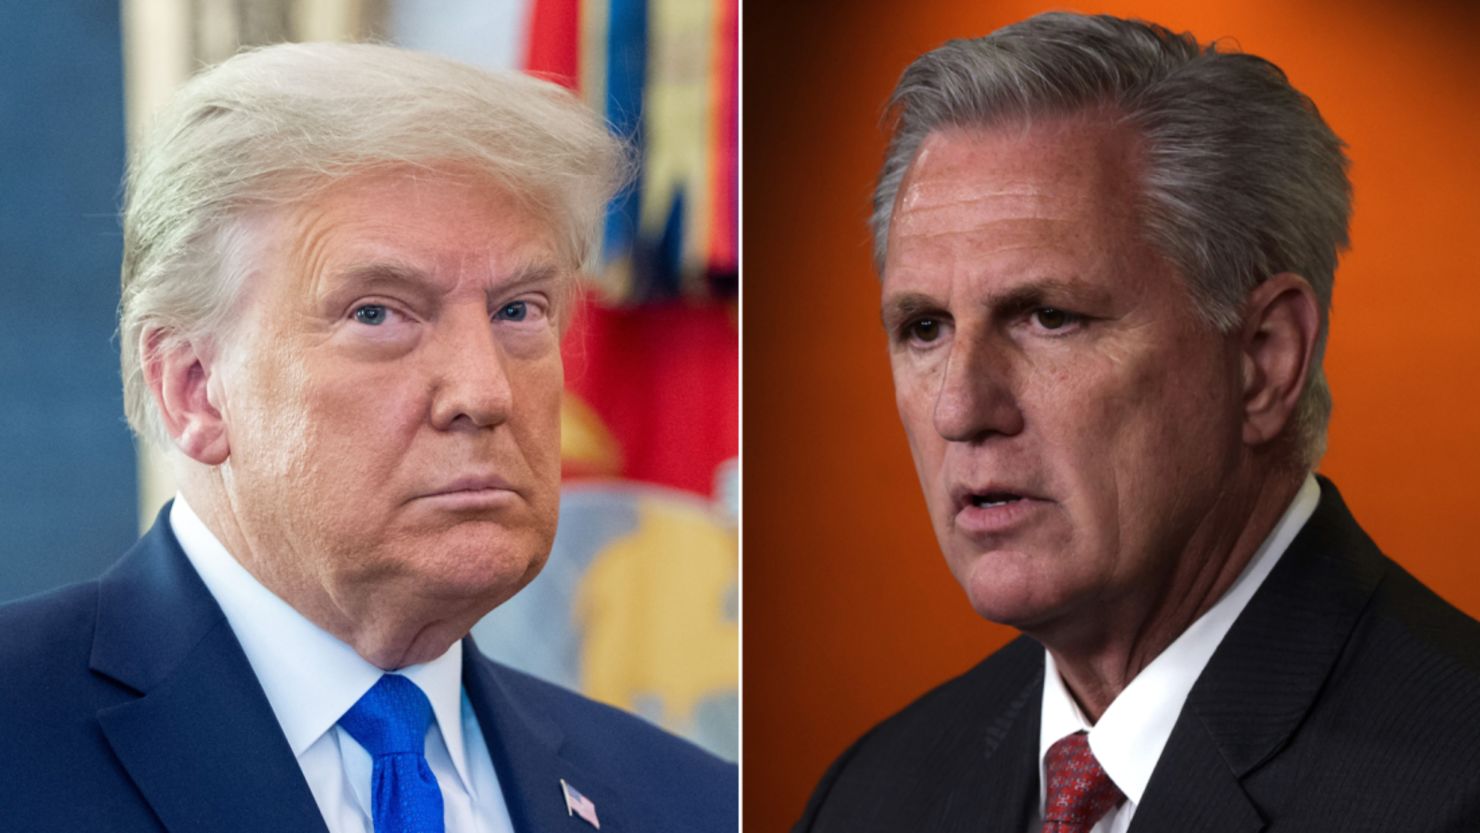 At left, former President Donald Trump, and, at right, House Minority Leader Kevin McCarthy, a California Republican.